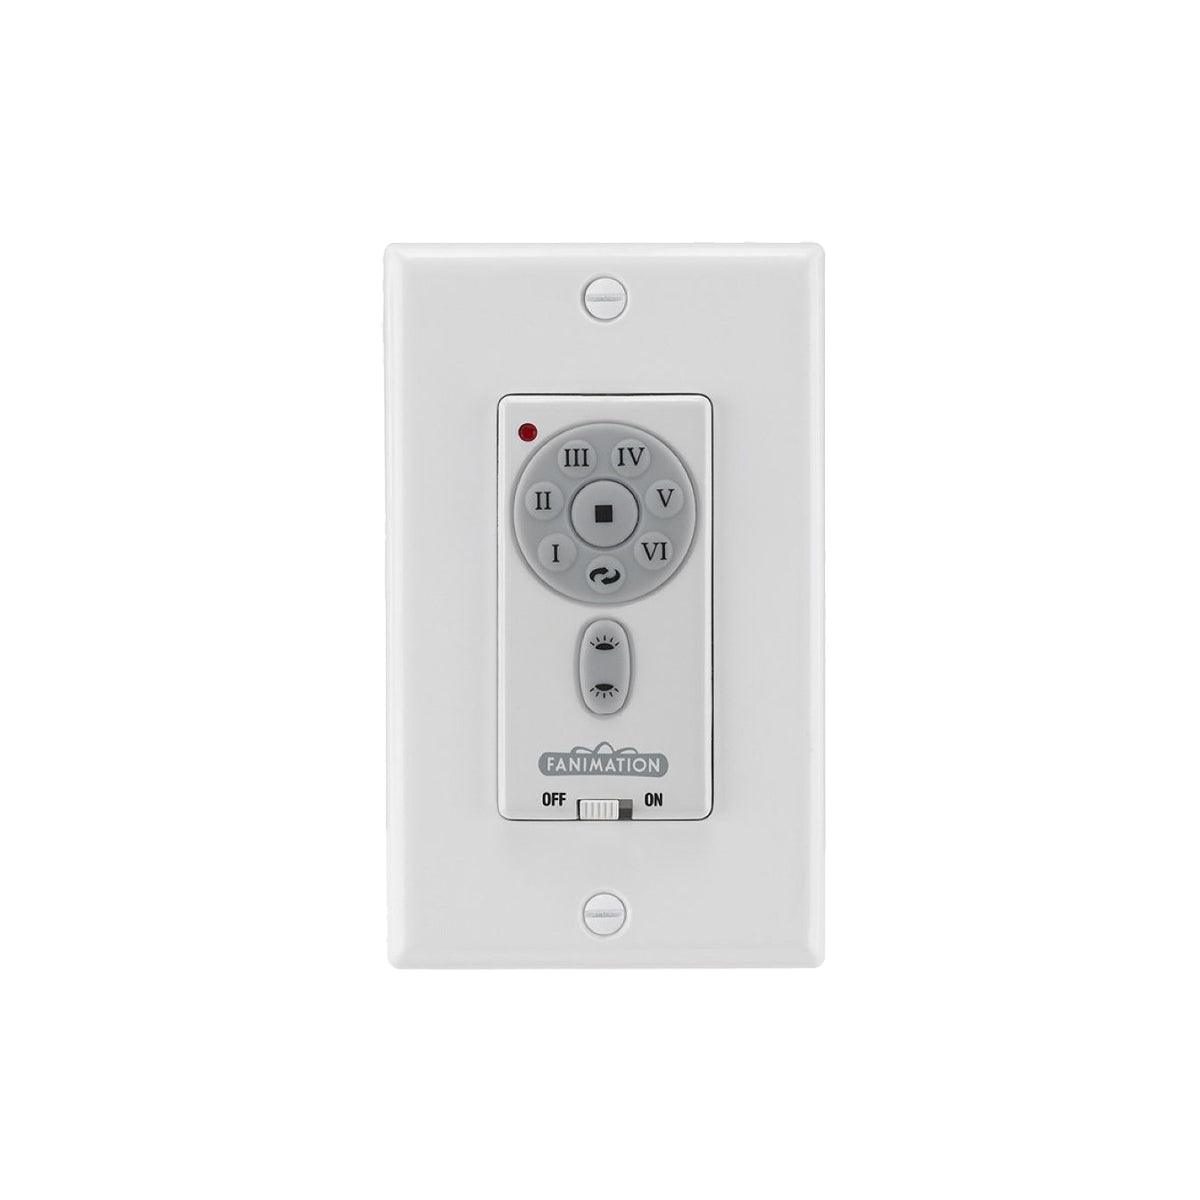 6-Speed DC Ceiling Fan And Up/Down Light Wall Control, Reversing Switch, White Finish